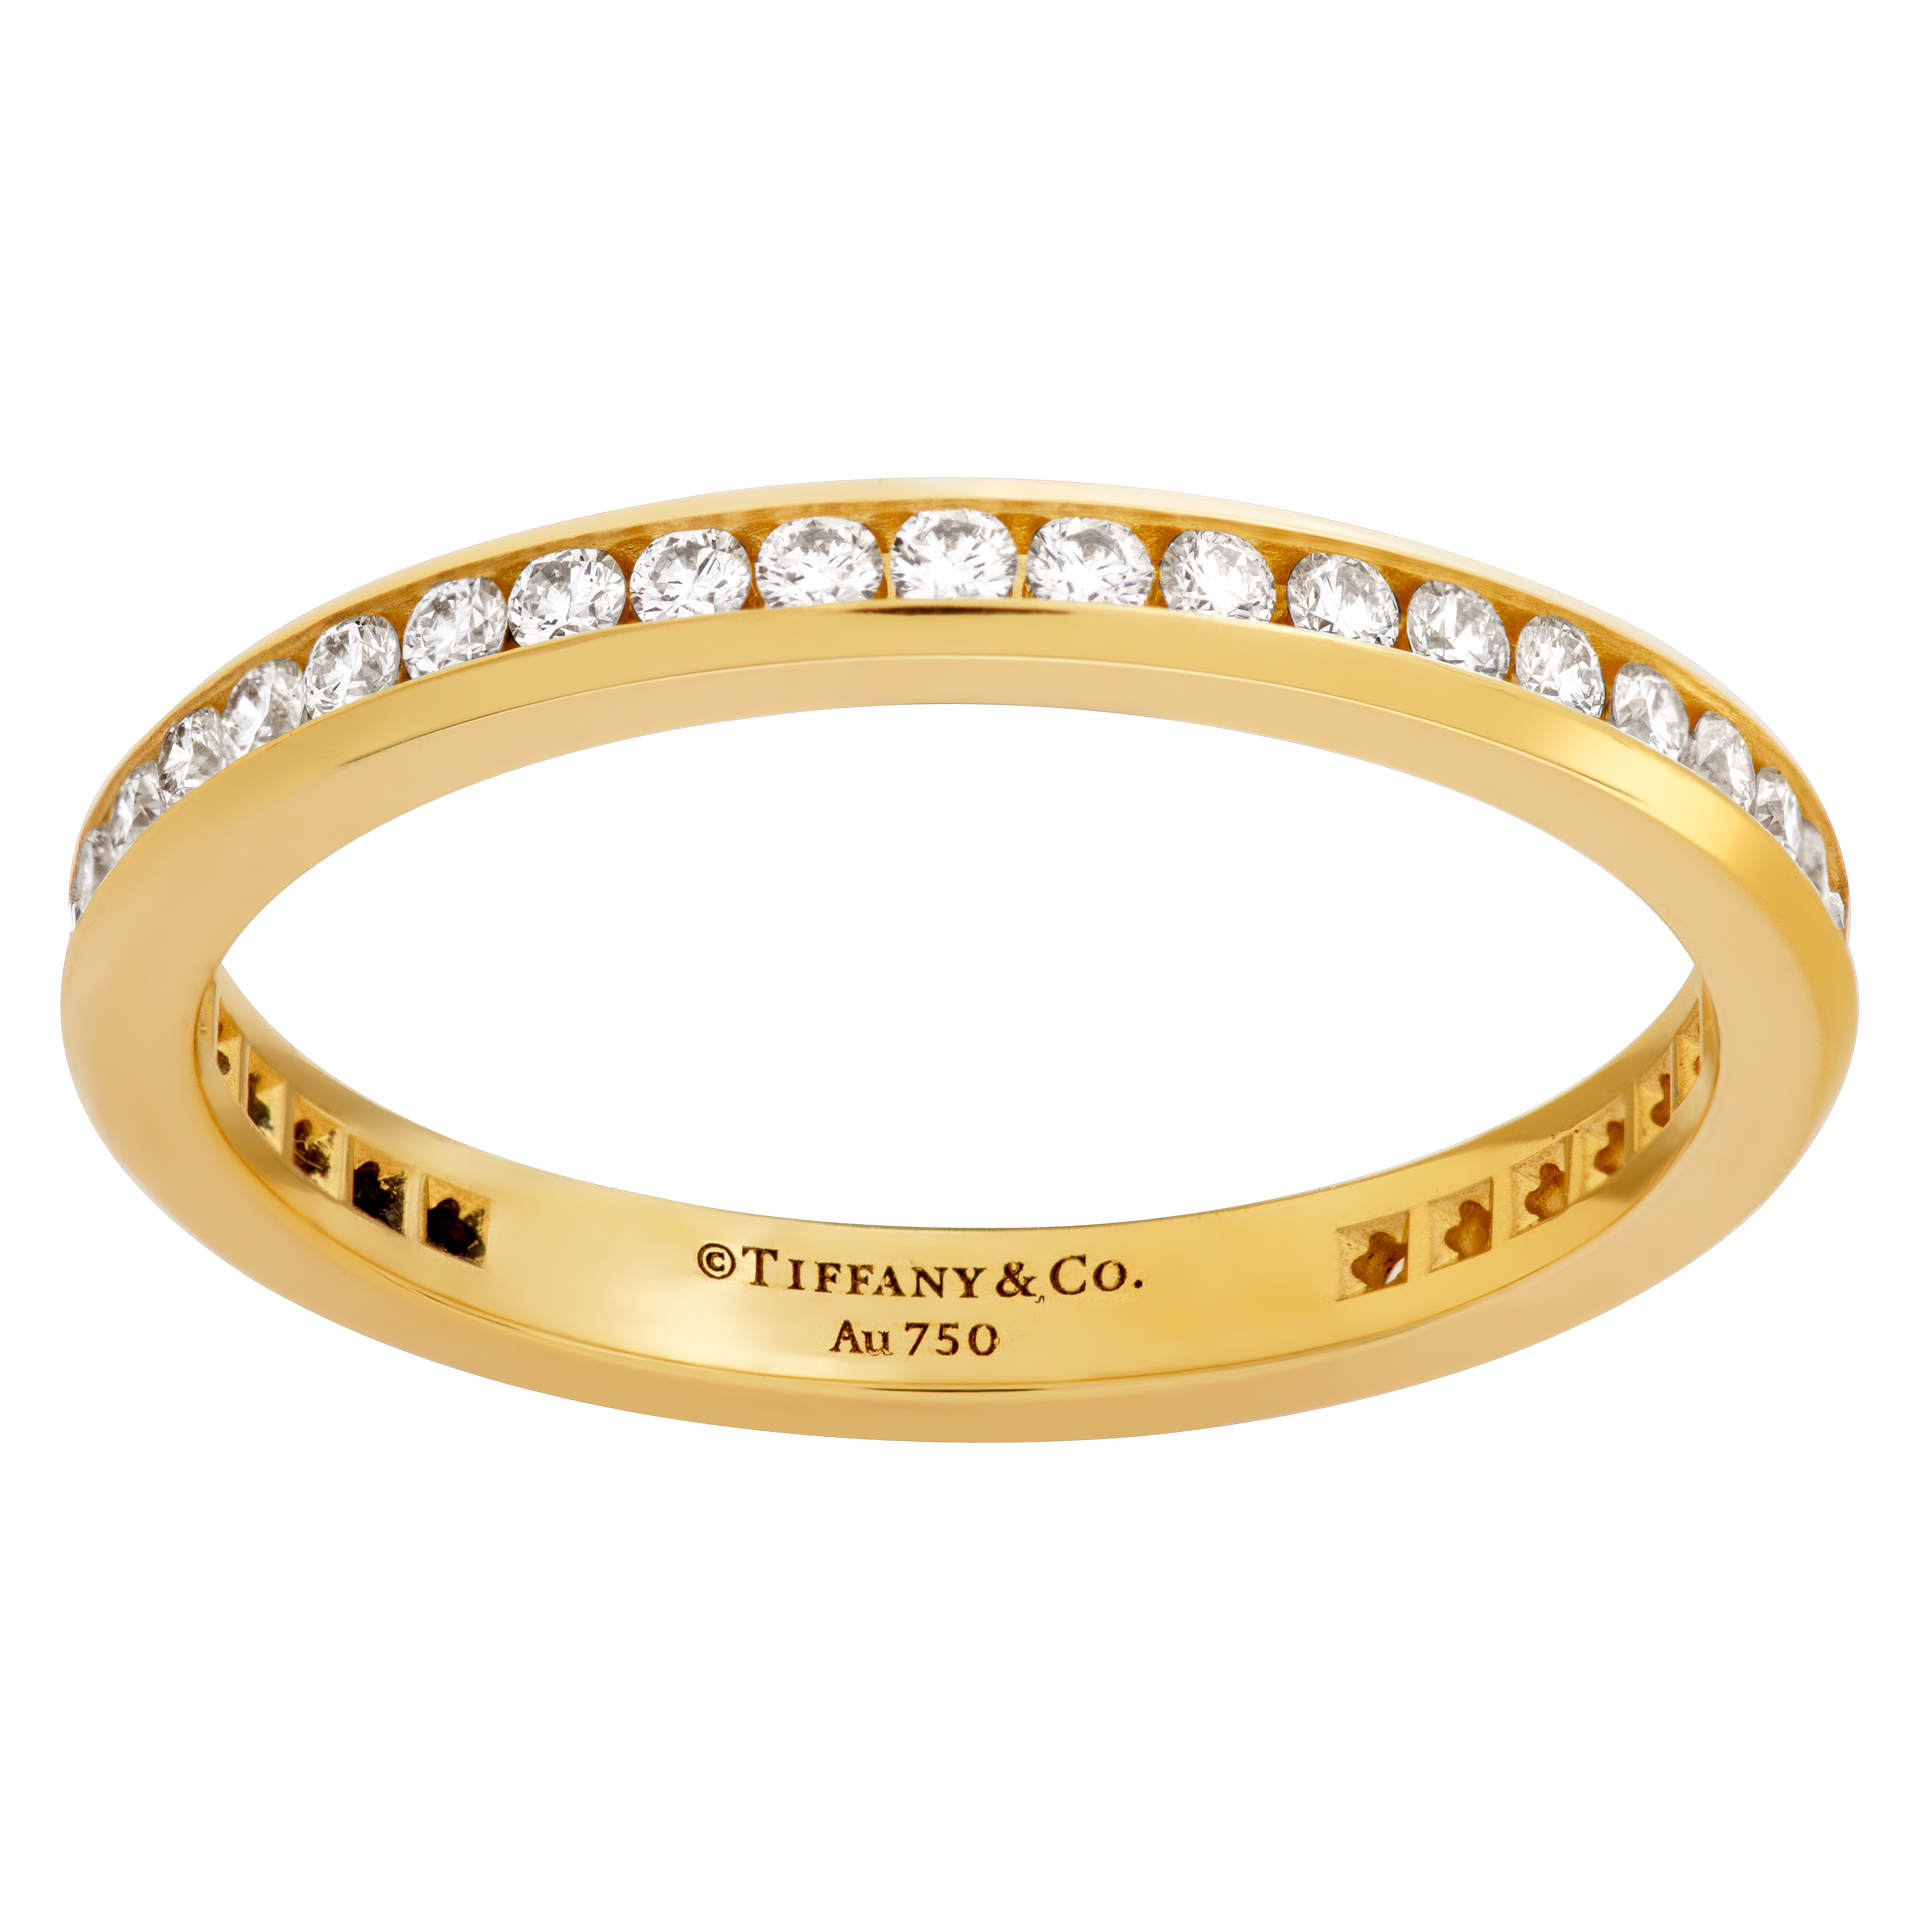 Tiffany & Co. "Soleste" full eternity band with diamonds in 18k image 1